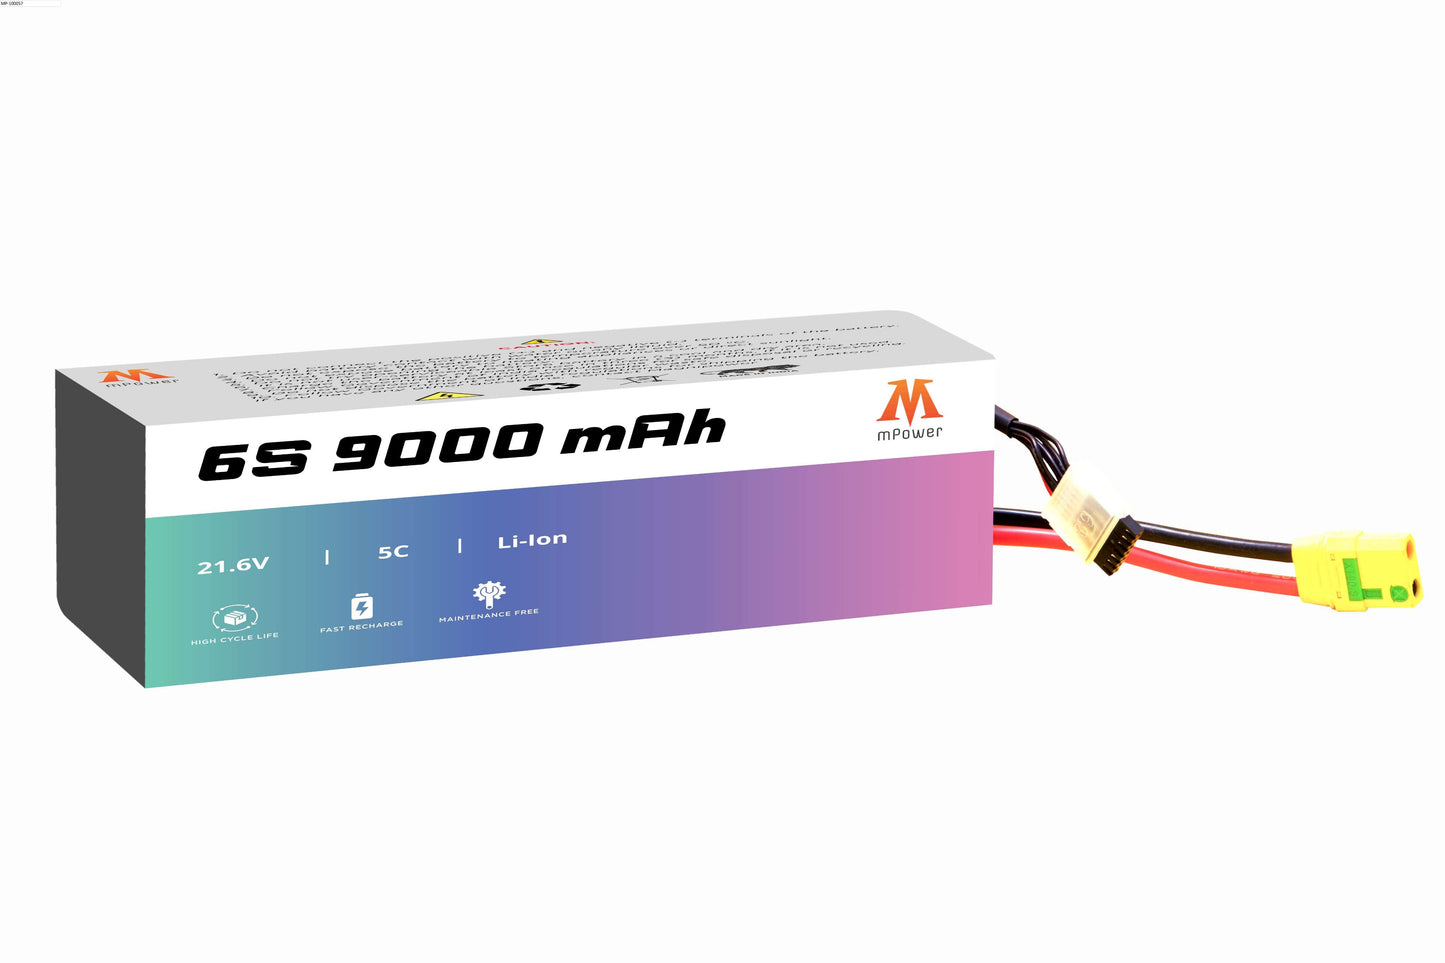 mPower 6S 9000mAh Lithium-Ion Battery for Surveillance Drones